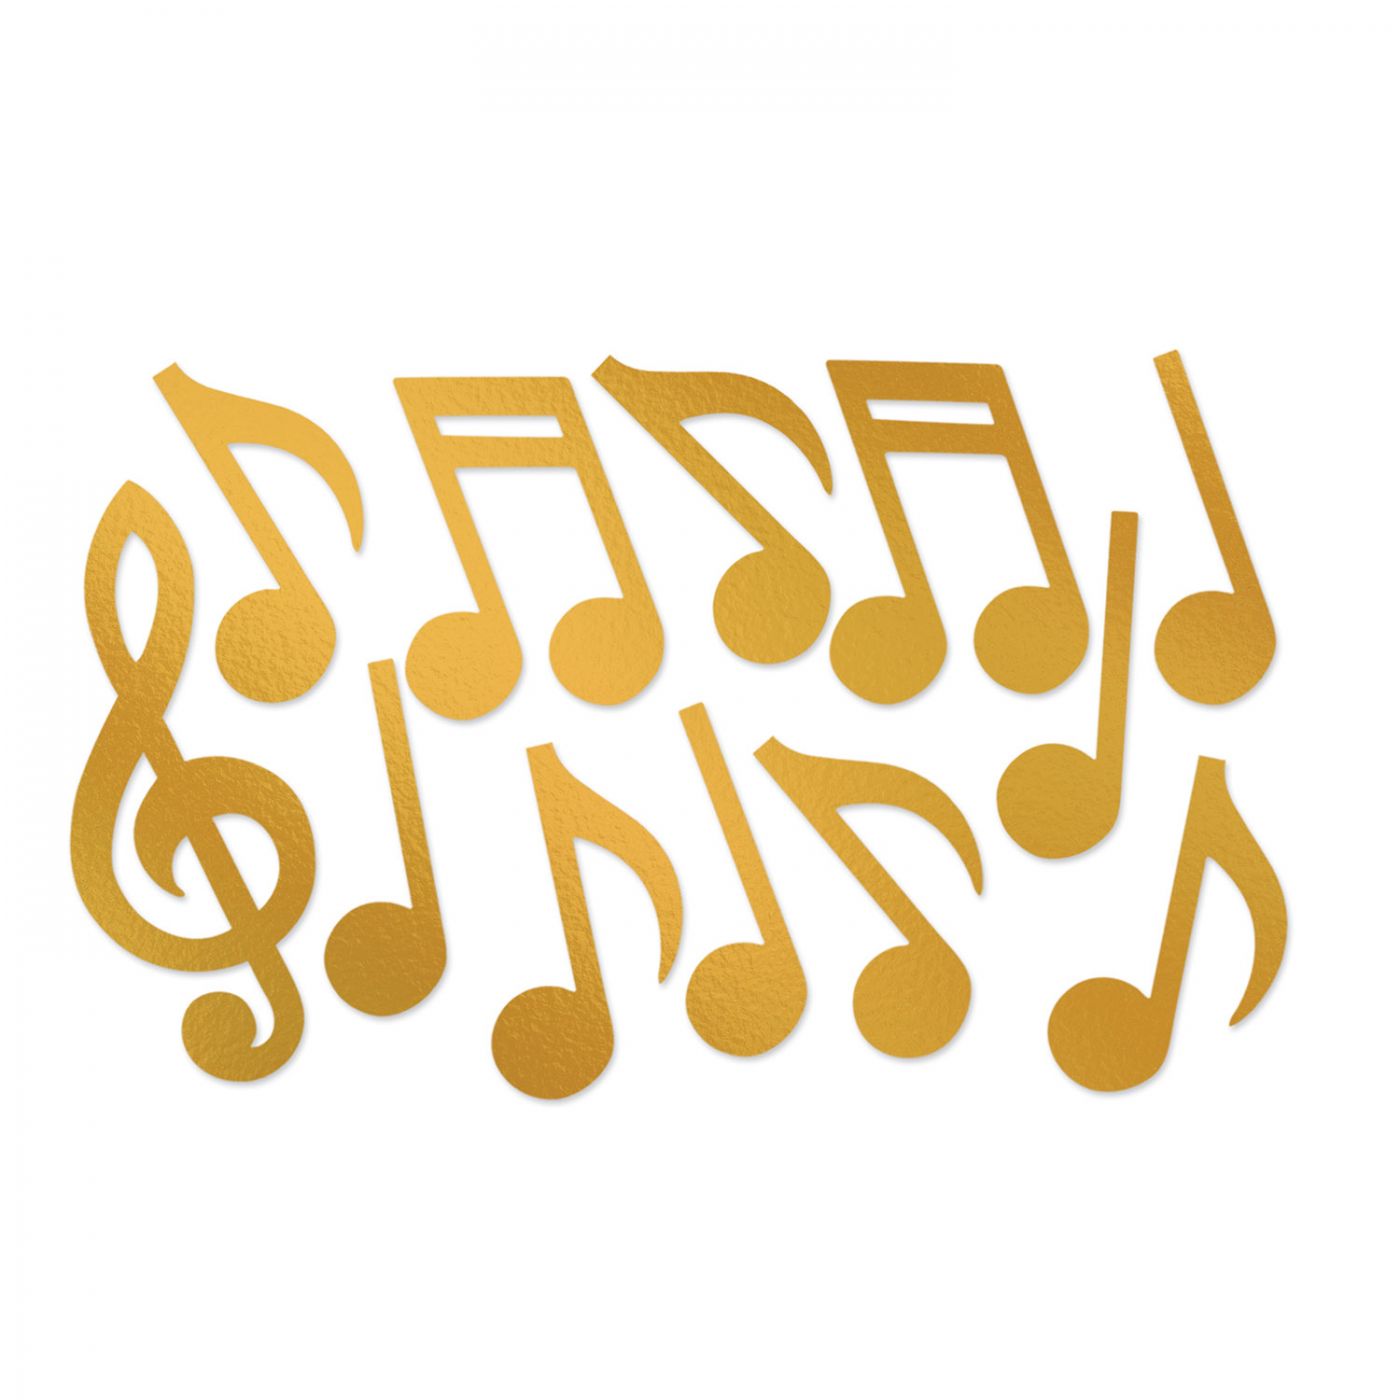 Gold Foil Musical Note Silhouettes image